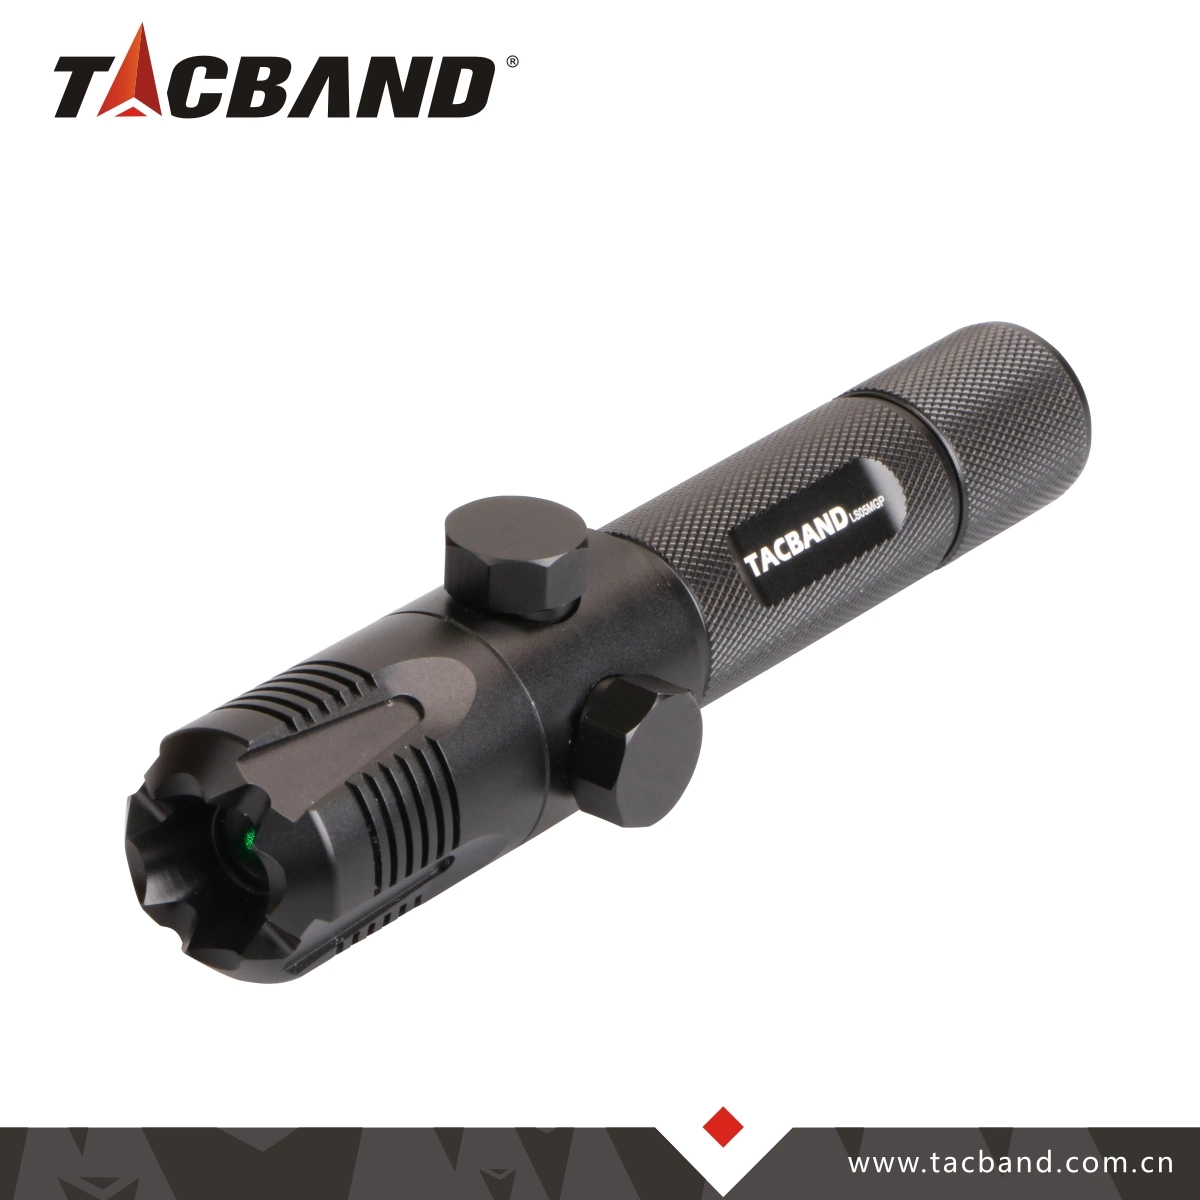 3rd Red Tactical Green Laser Pointer Sight with Mount